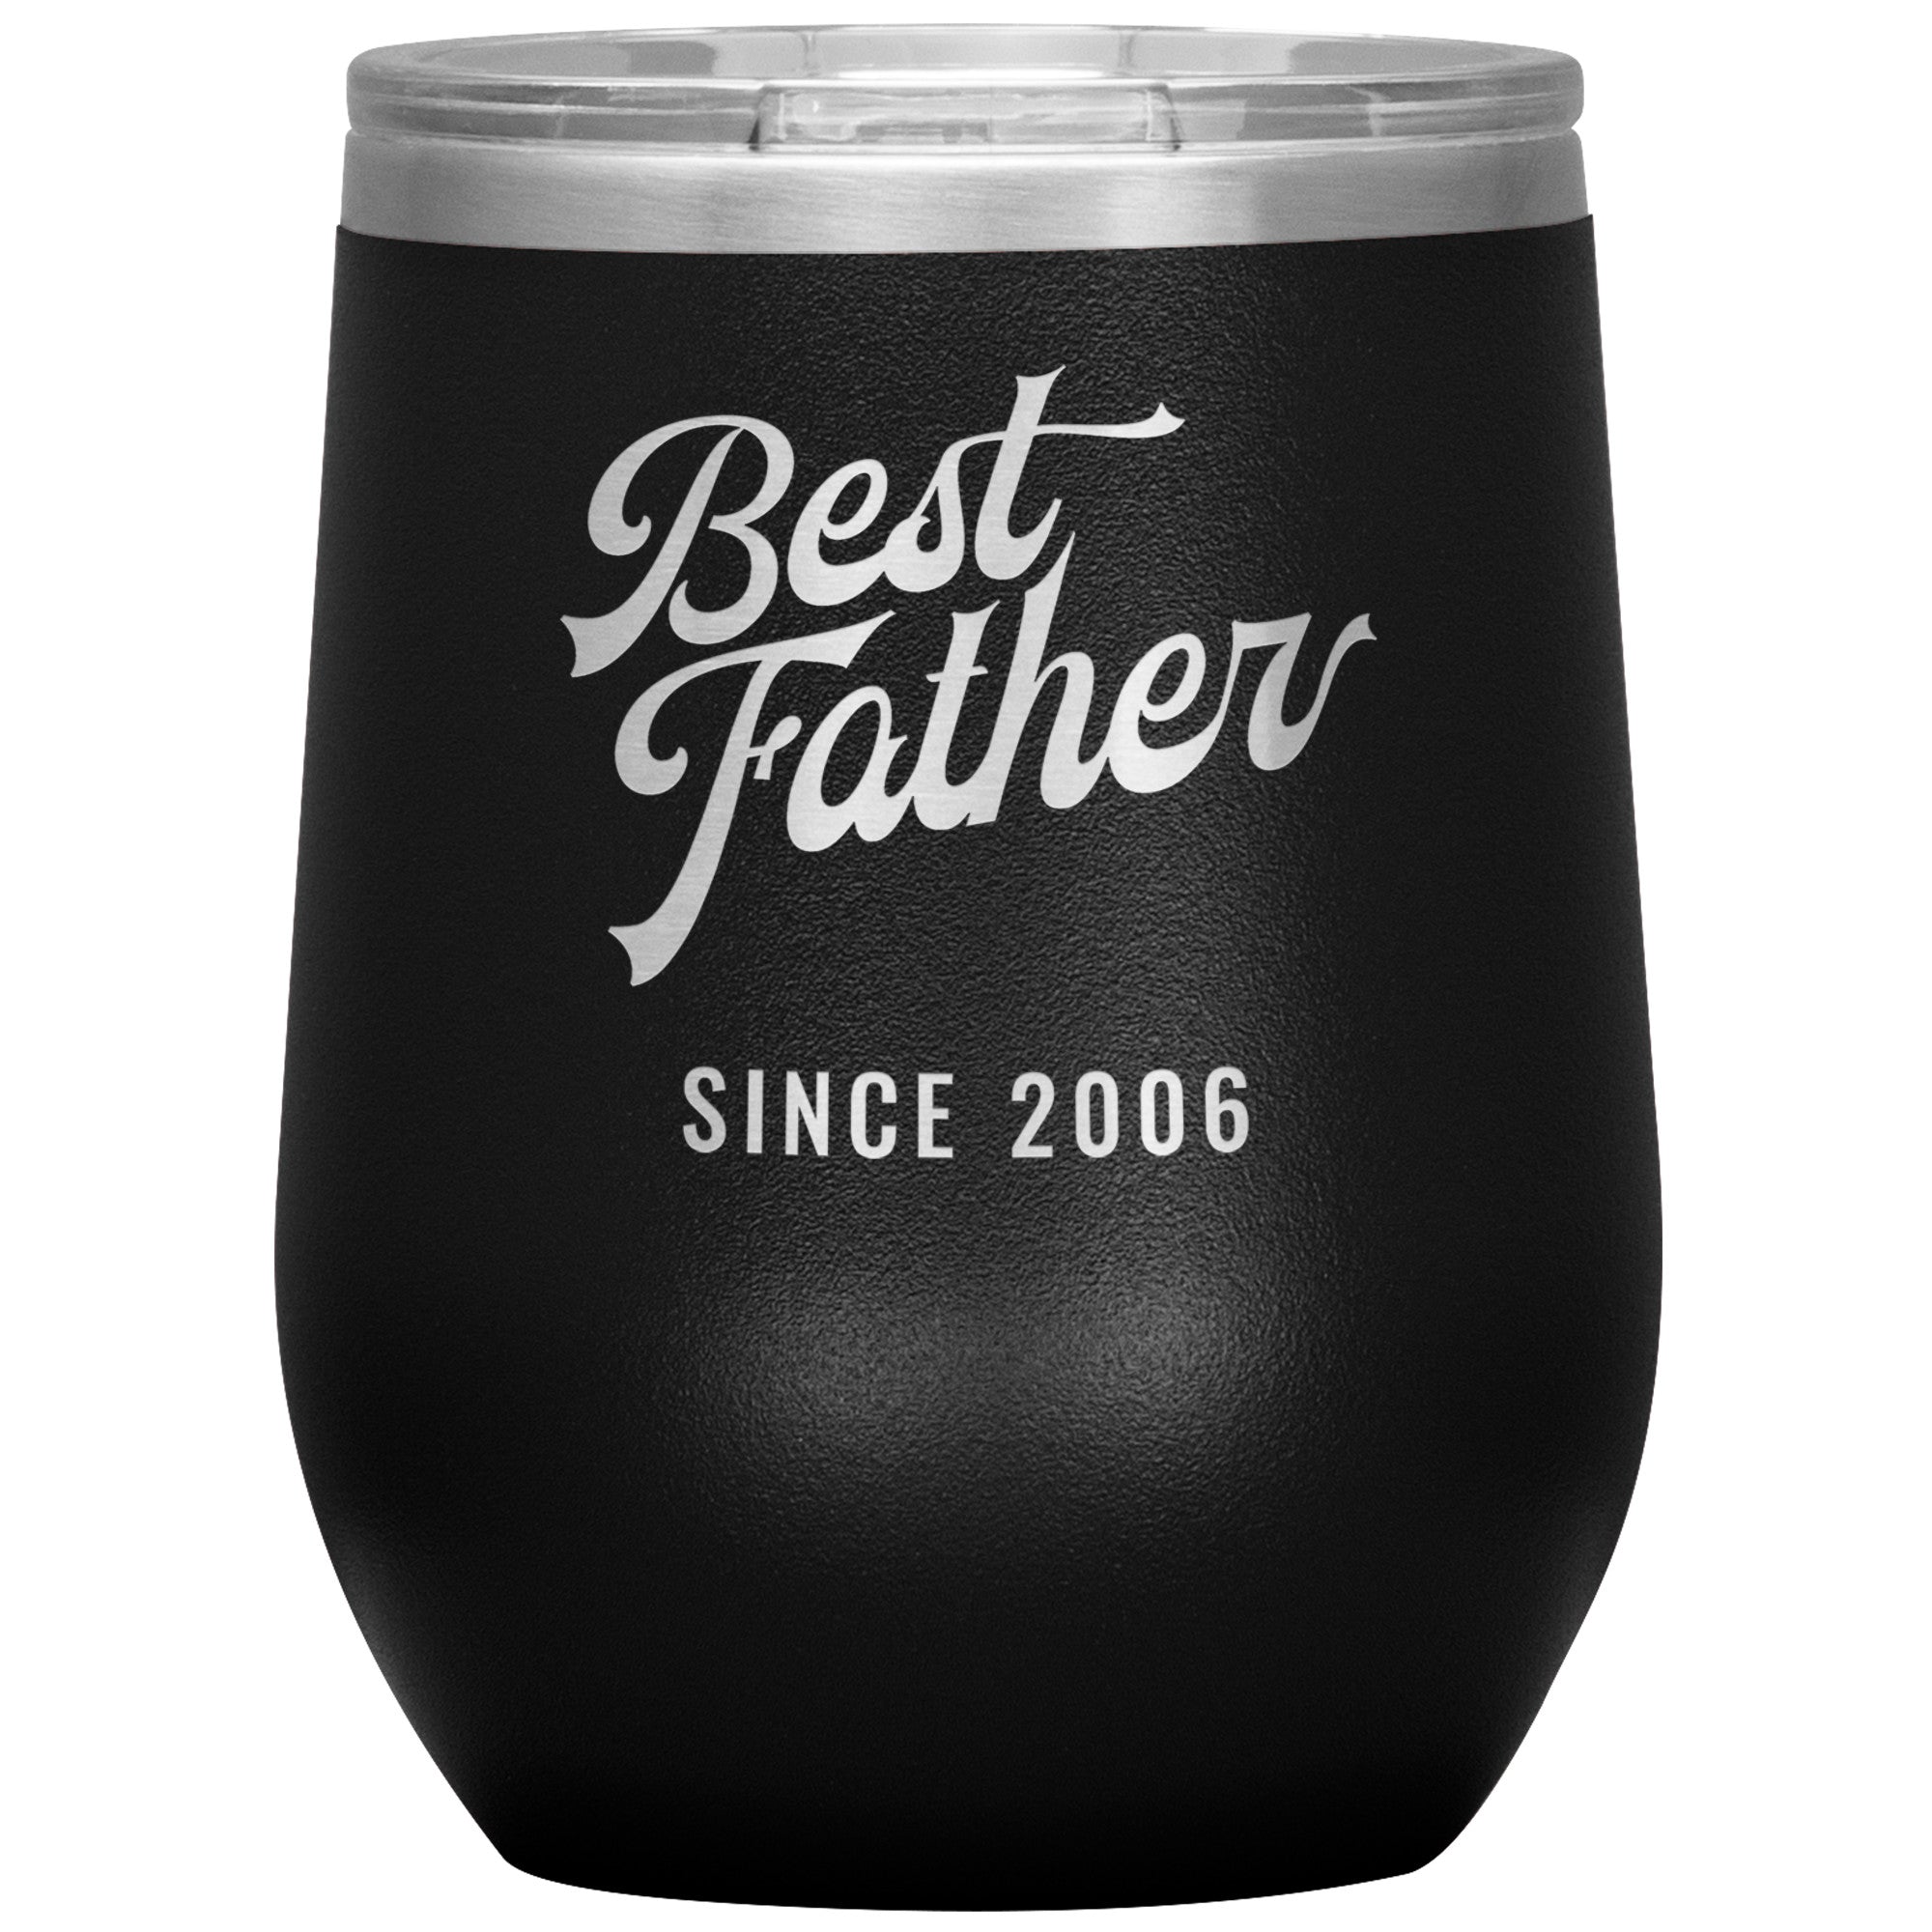 Best Father Since 2006 - 12oz Insulated Wine Tumbler